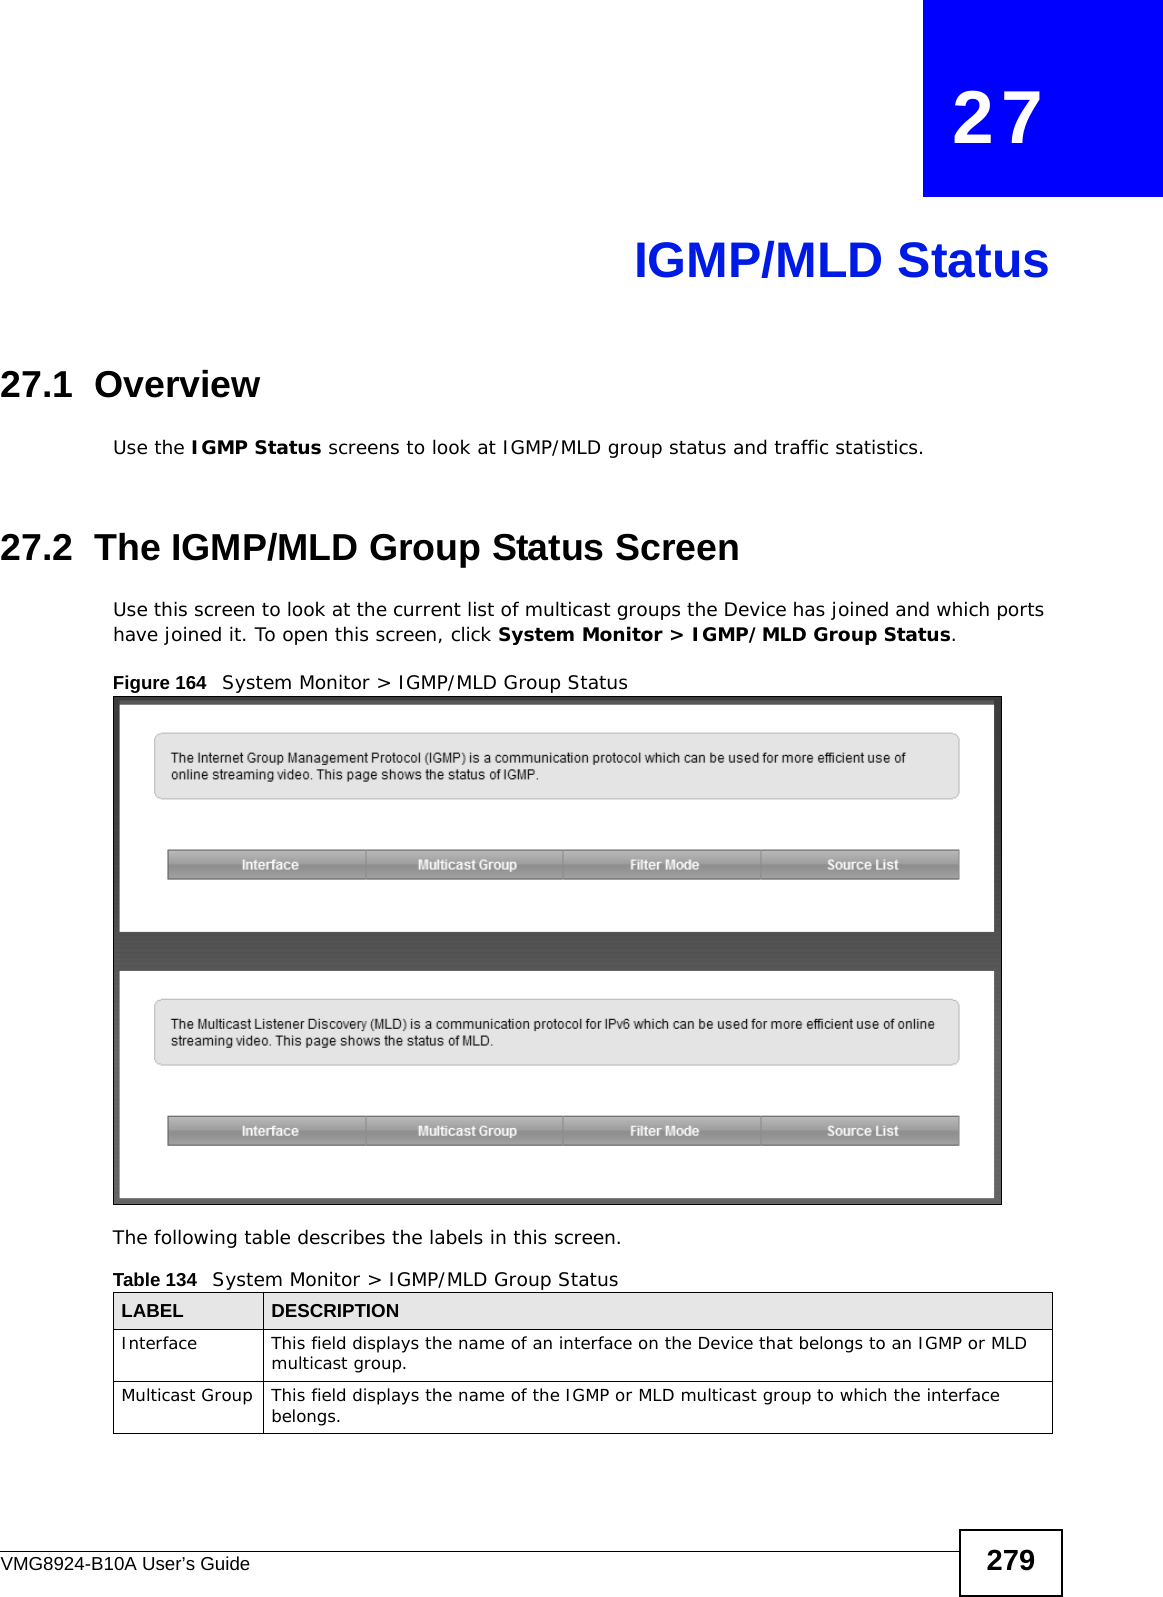 VMG8924-B10A User’s Guide 279CHAPTER   27IGMP/MLD Status27.1  OverviewUse the IGMP Status screens to look at IGMP/MLD group status and traffic statistics. 27.2  The IGMP/MLD Group Status ScreenUse this screen to look at the current list of multicast groups the Device has joined and which ports have joined it. To open this screen, click System Monitor &gt; IGMP/MLD Group Status.Figure 164   System Monitor &gt; IGMP/MLD Group StatusThe following table describes the labels in this screen.Table 134   System Monitor &gt; IGMP/MLD Group StatusLABEL DESCRIPTIONInterface This field displays the name of an interface on the Device that belongs to an IGMP or MLD multicast group. Multicast Group This field displays the name of the IGMP or MLD multicast group to which the interface belongs. 